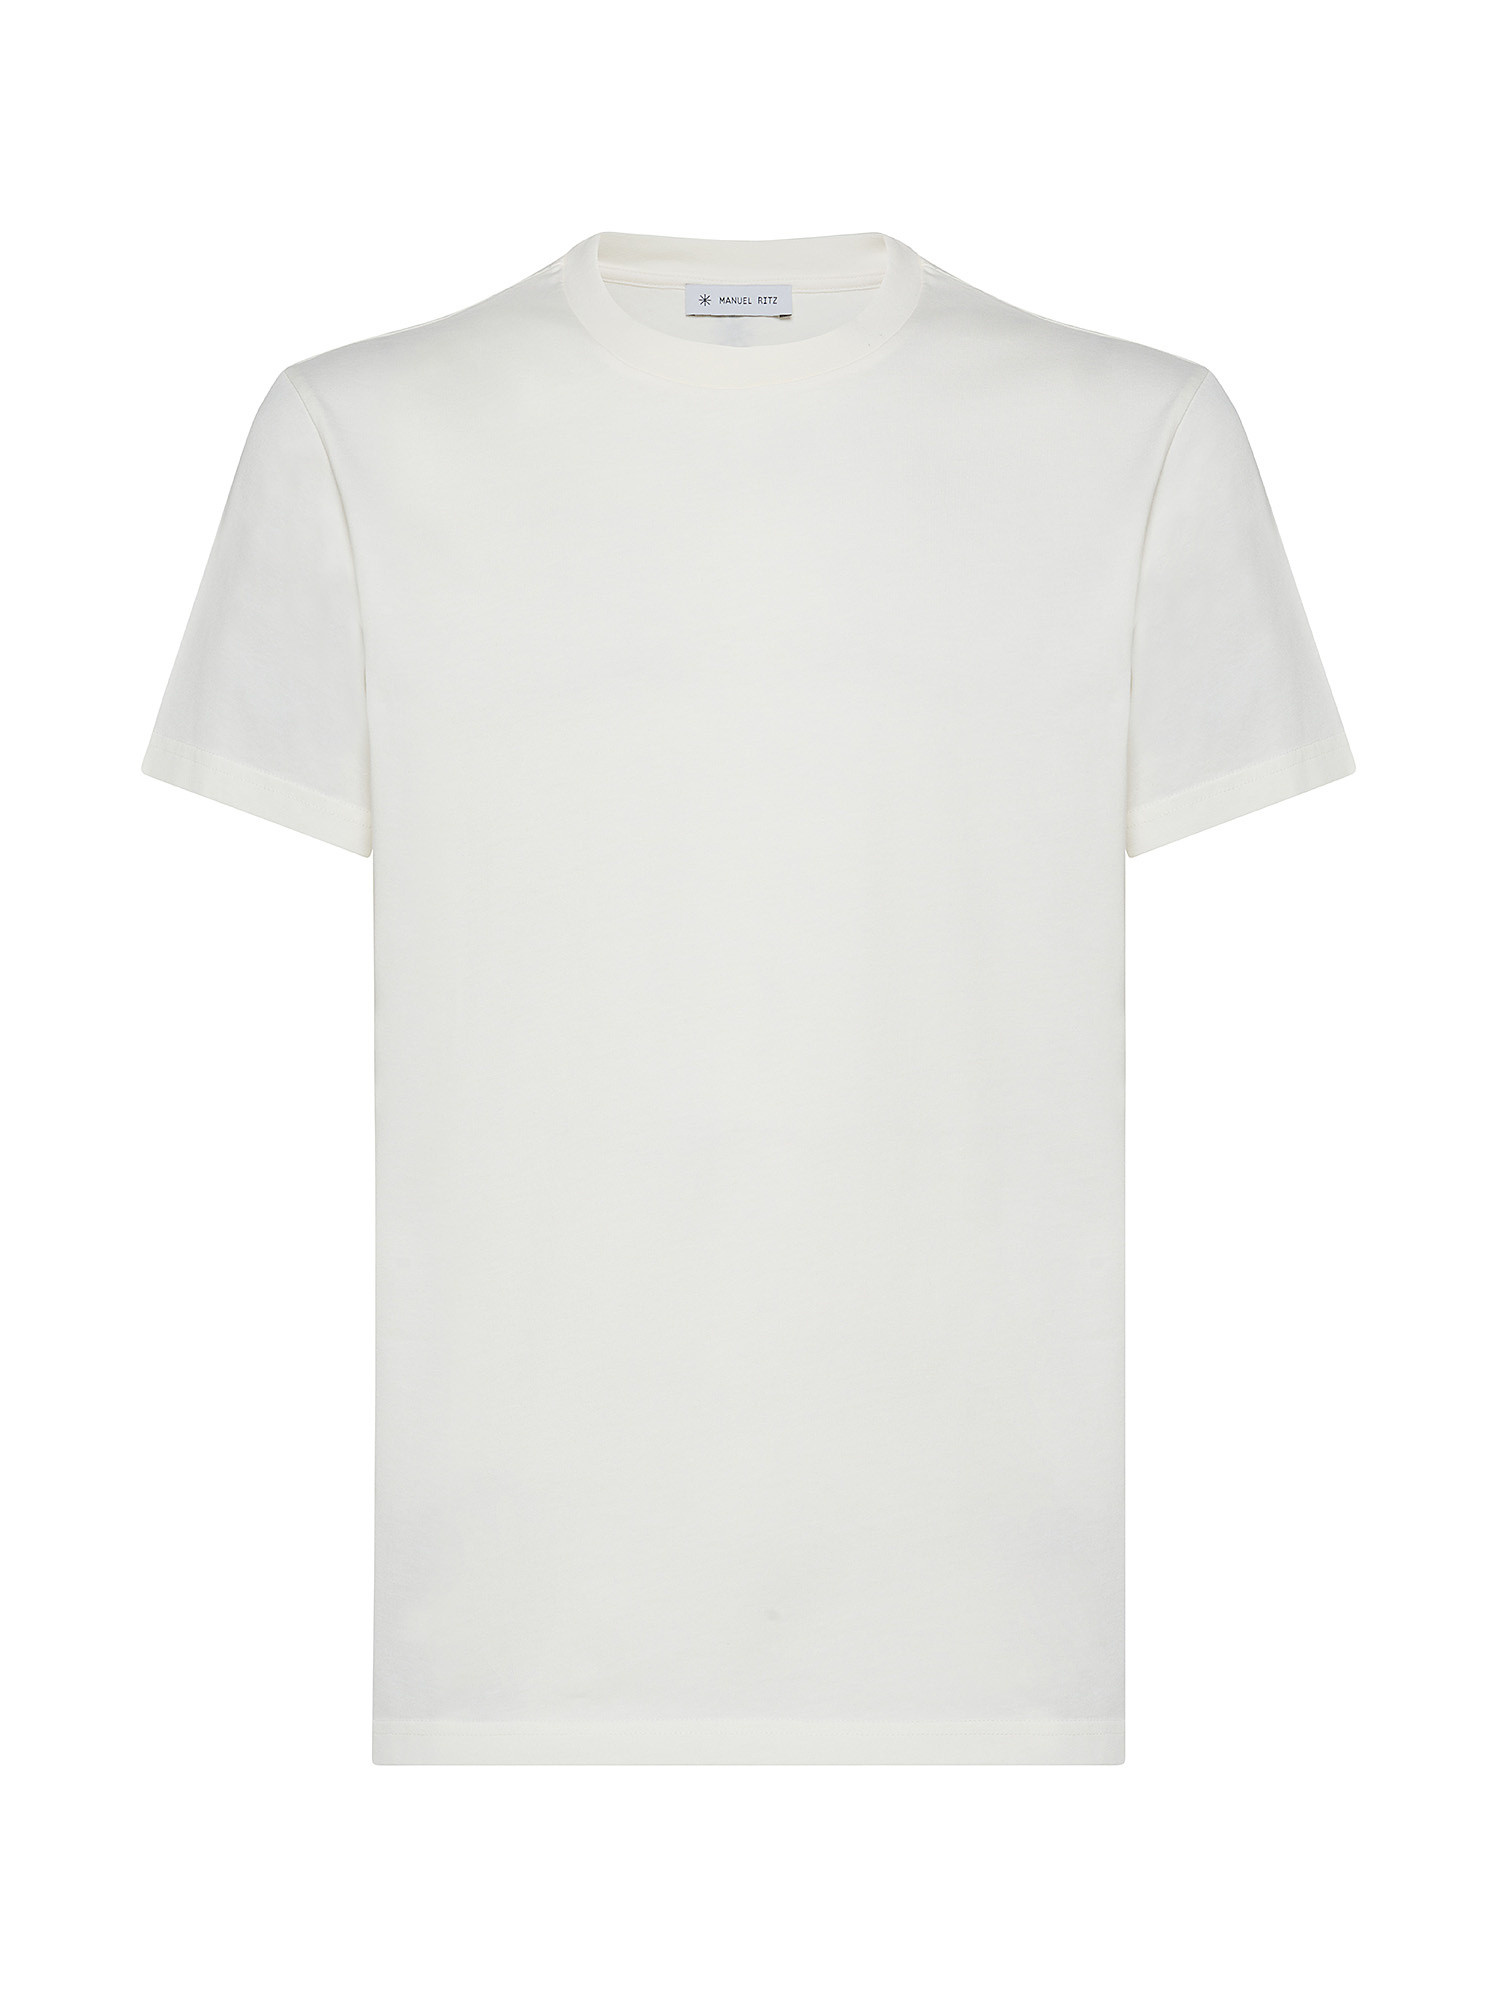 Manuel Ritz - T-shirt in cotone, Bianco, large image number 0